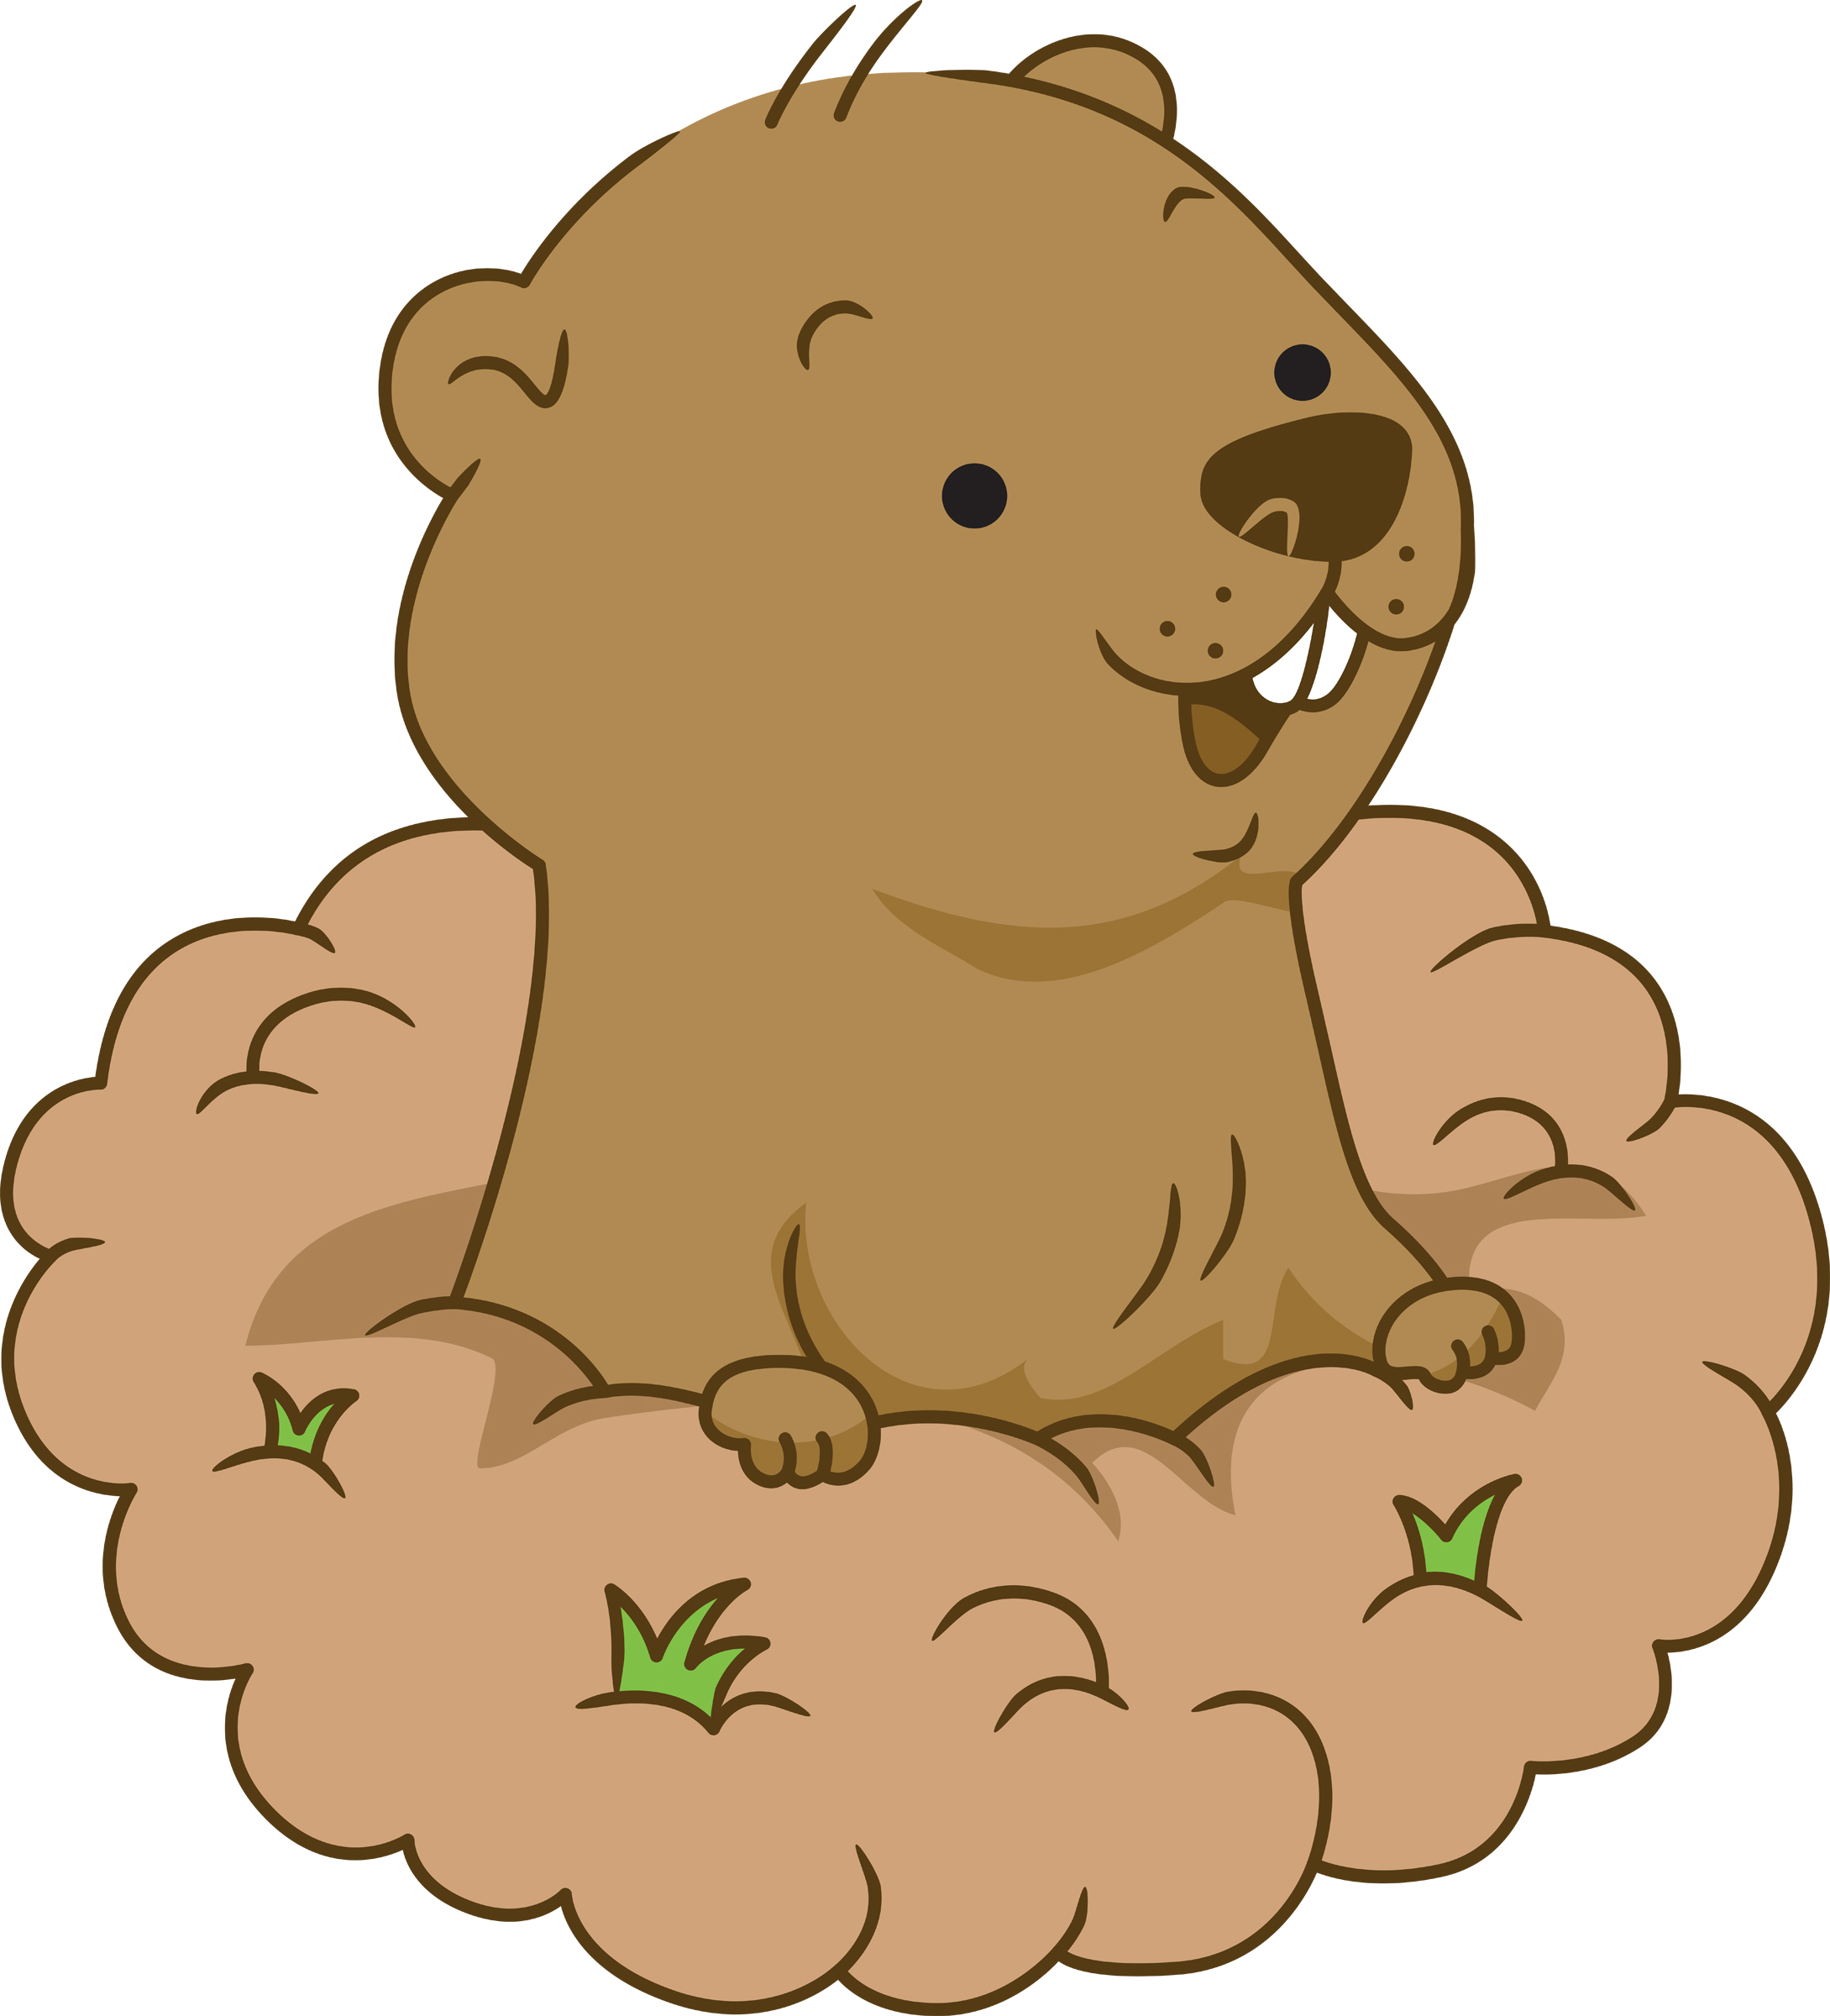 groundhog with shadow clipart - Clip Art Library.